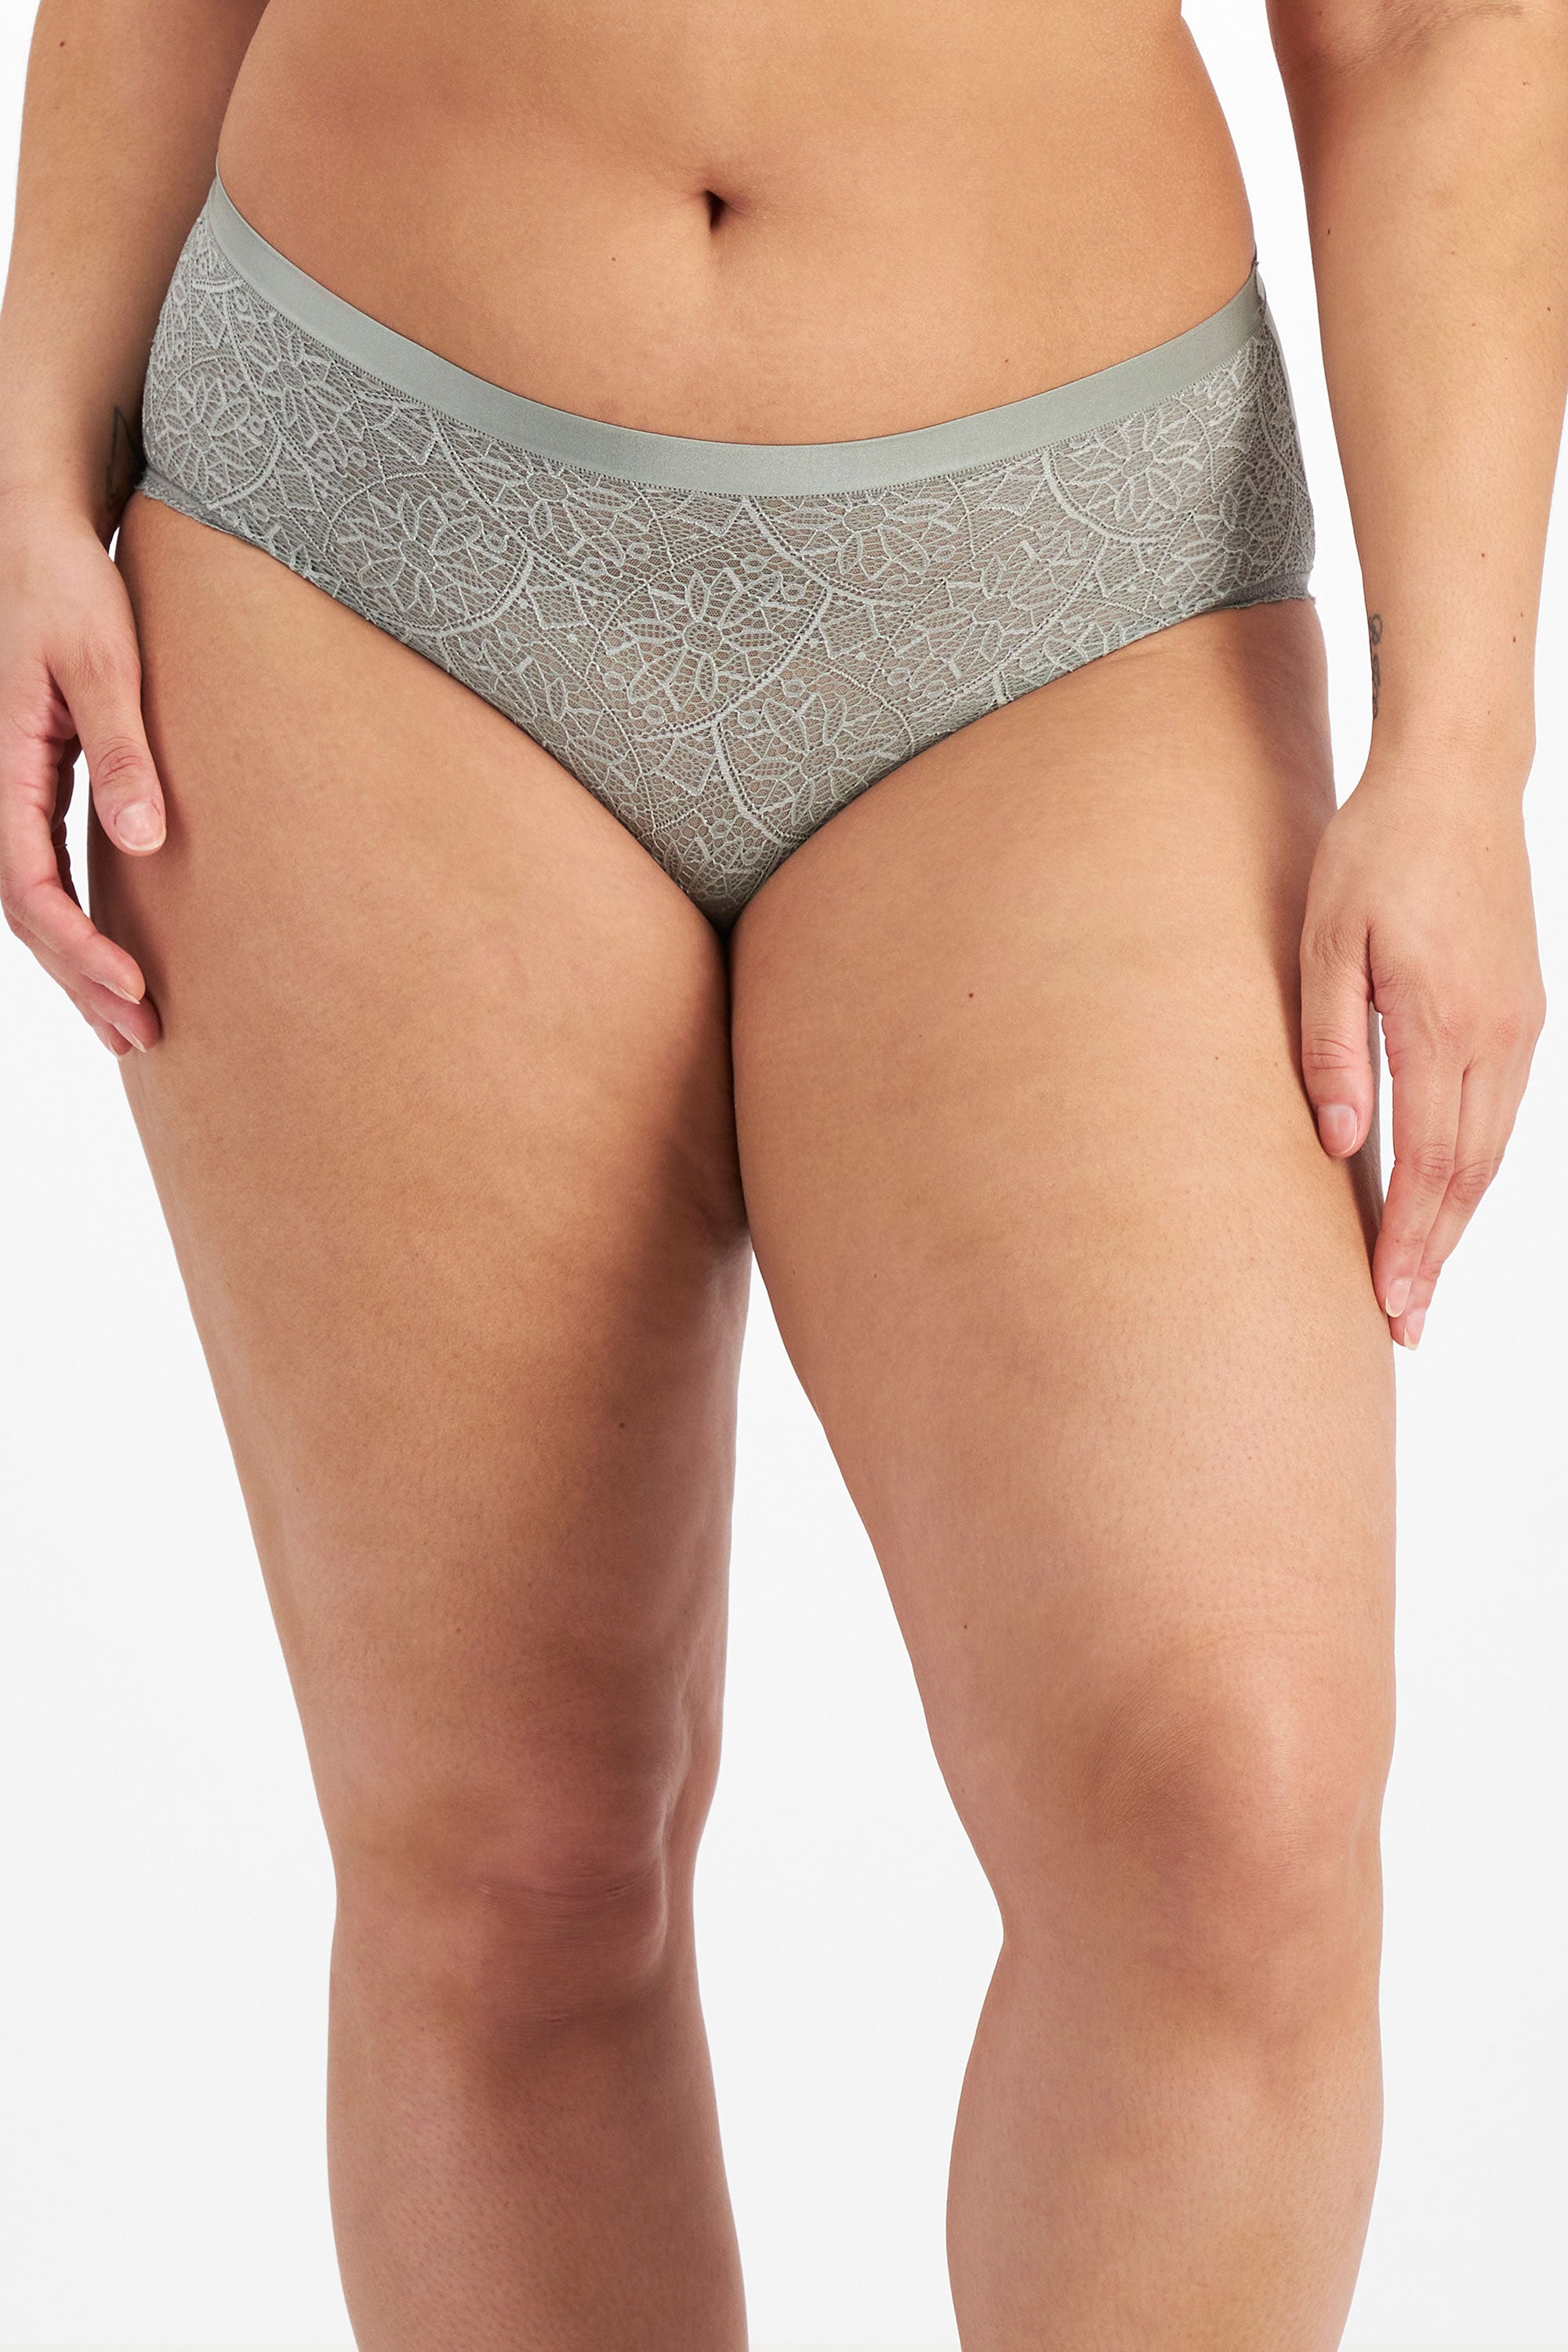 Barely There Lace Full Brief - Genevieve's Wardrobe